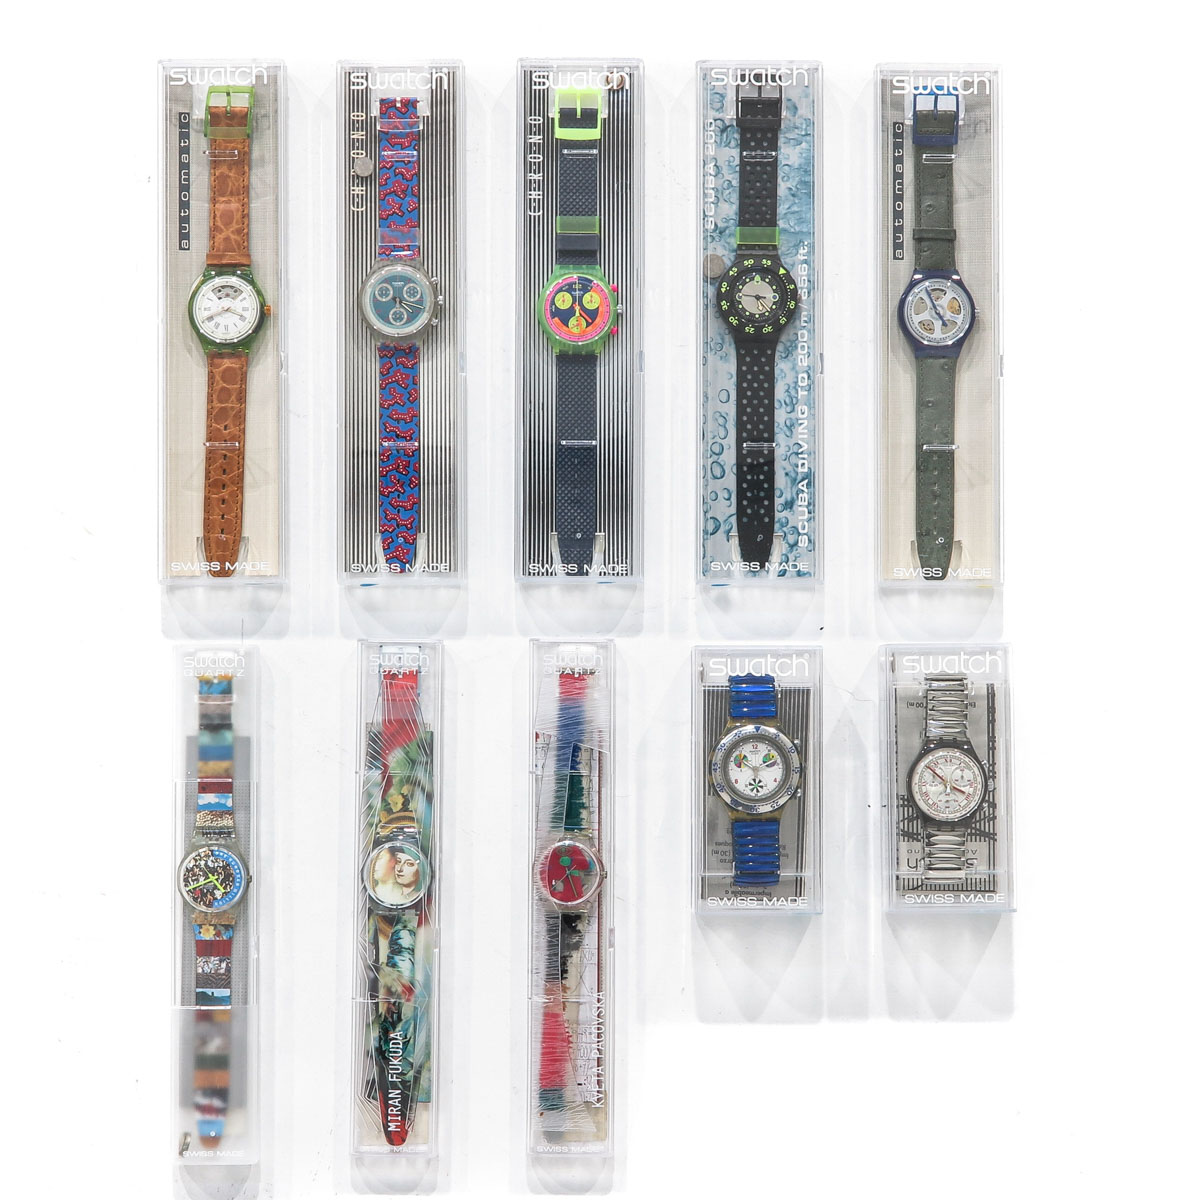 A Collection of 10 Swatch Watches